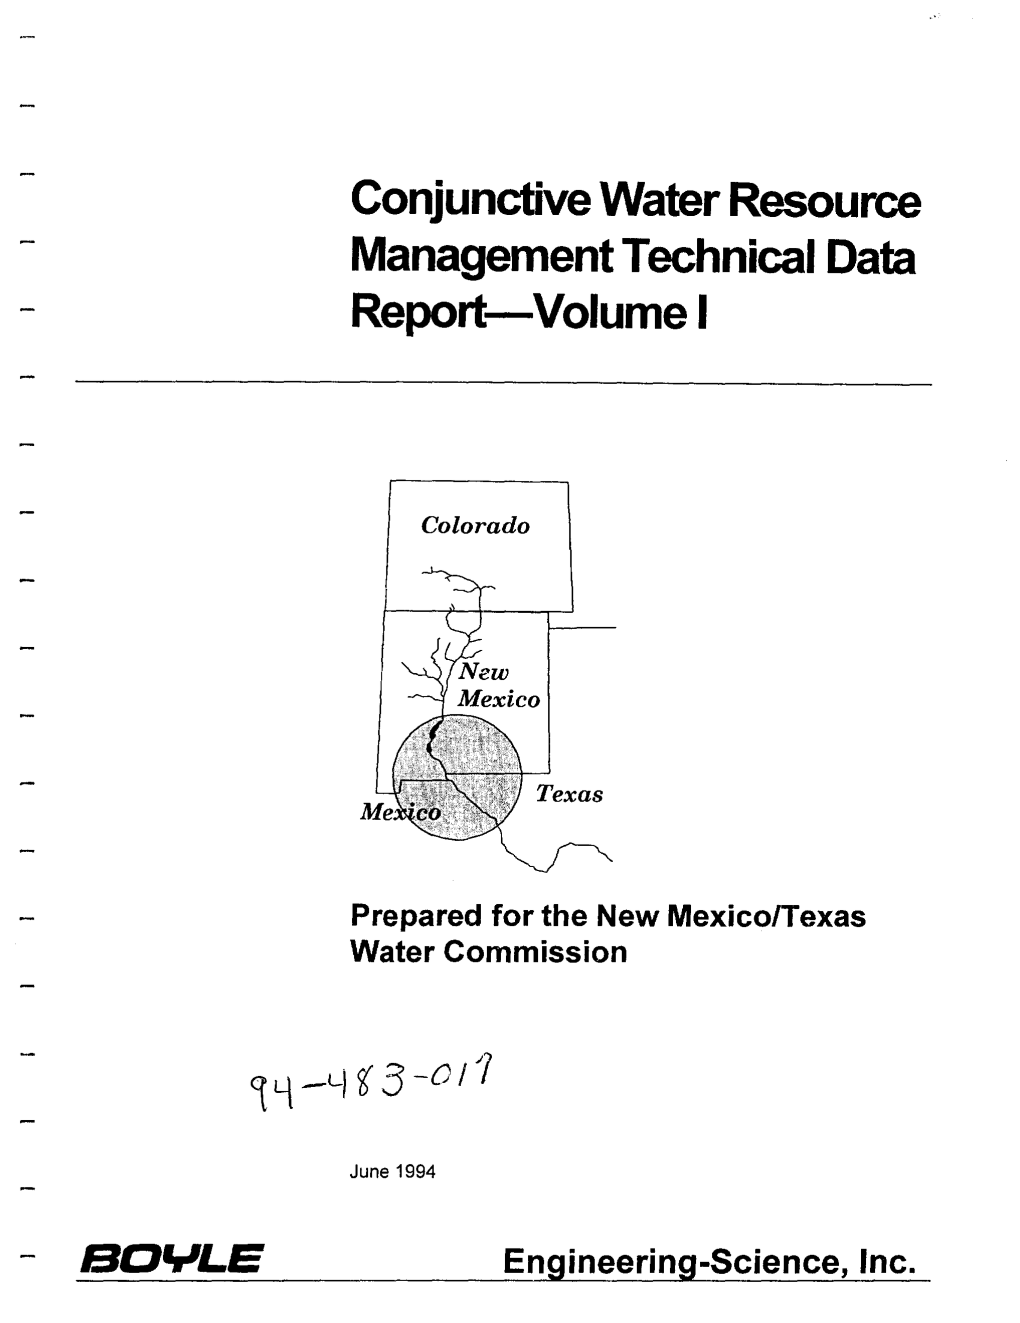 Conjunctive Water Resource Management Technical Data Report-Volume I